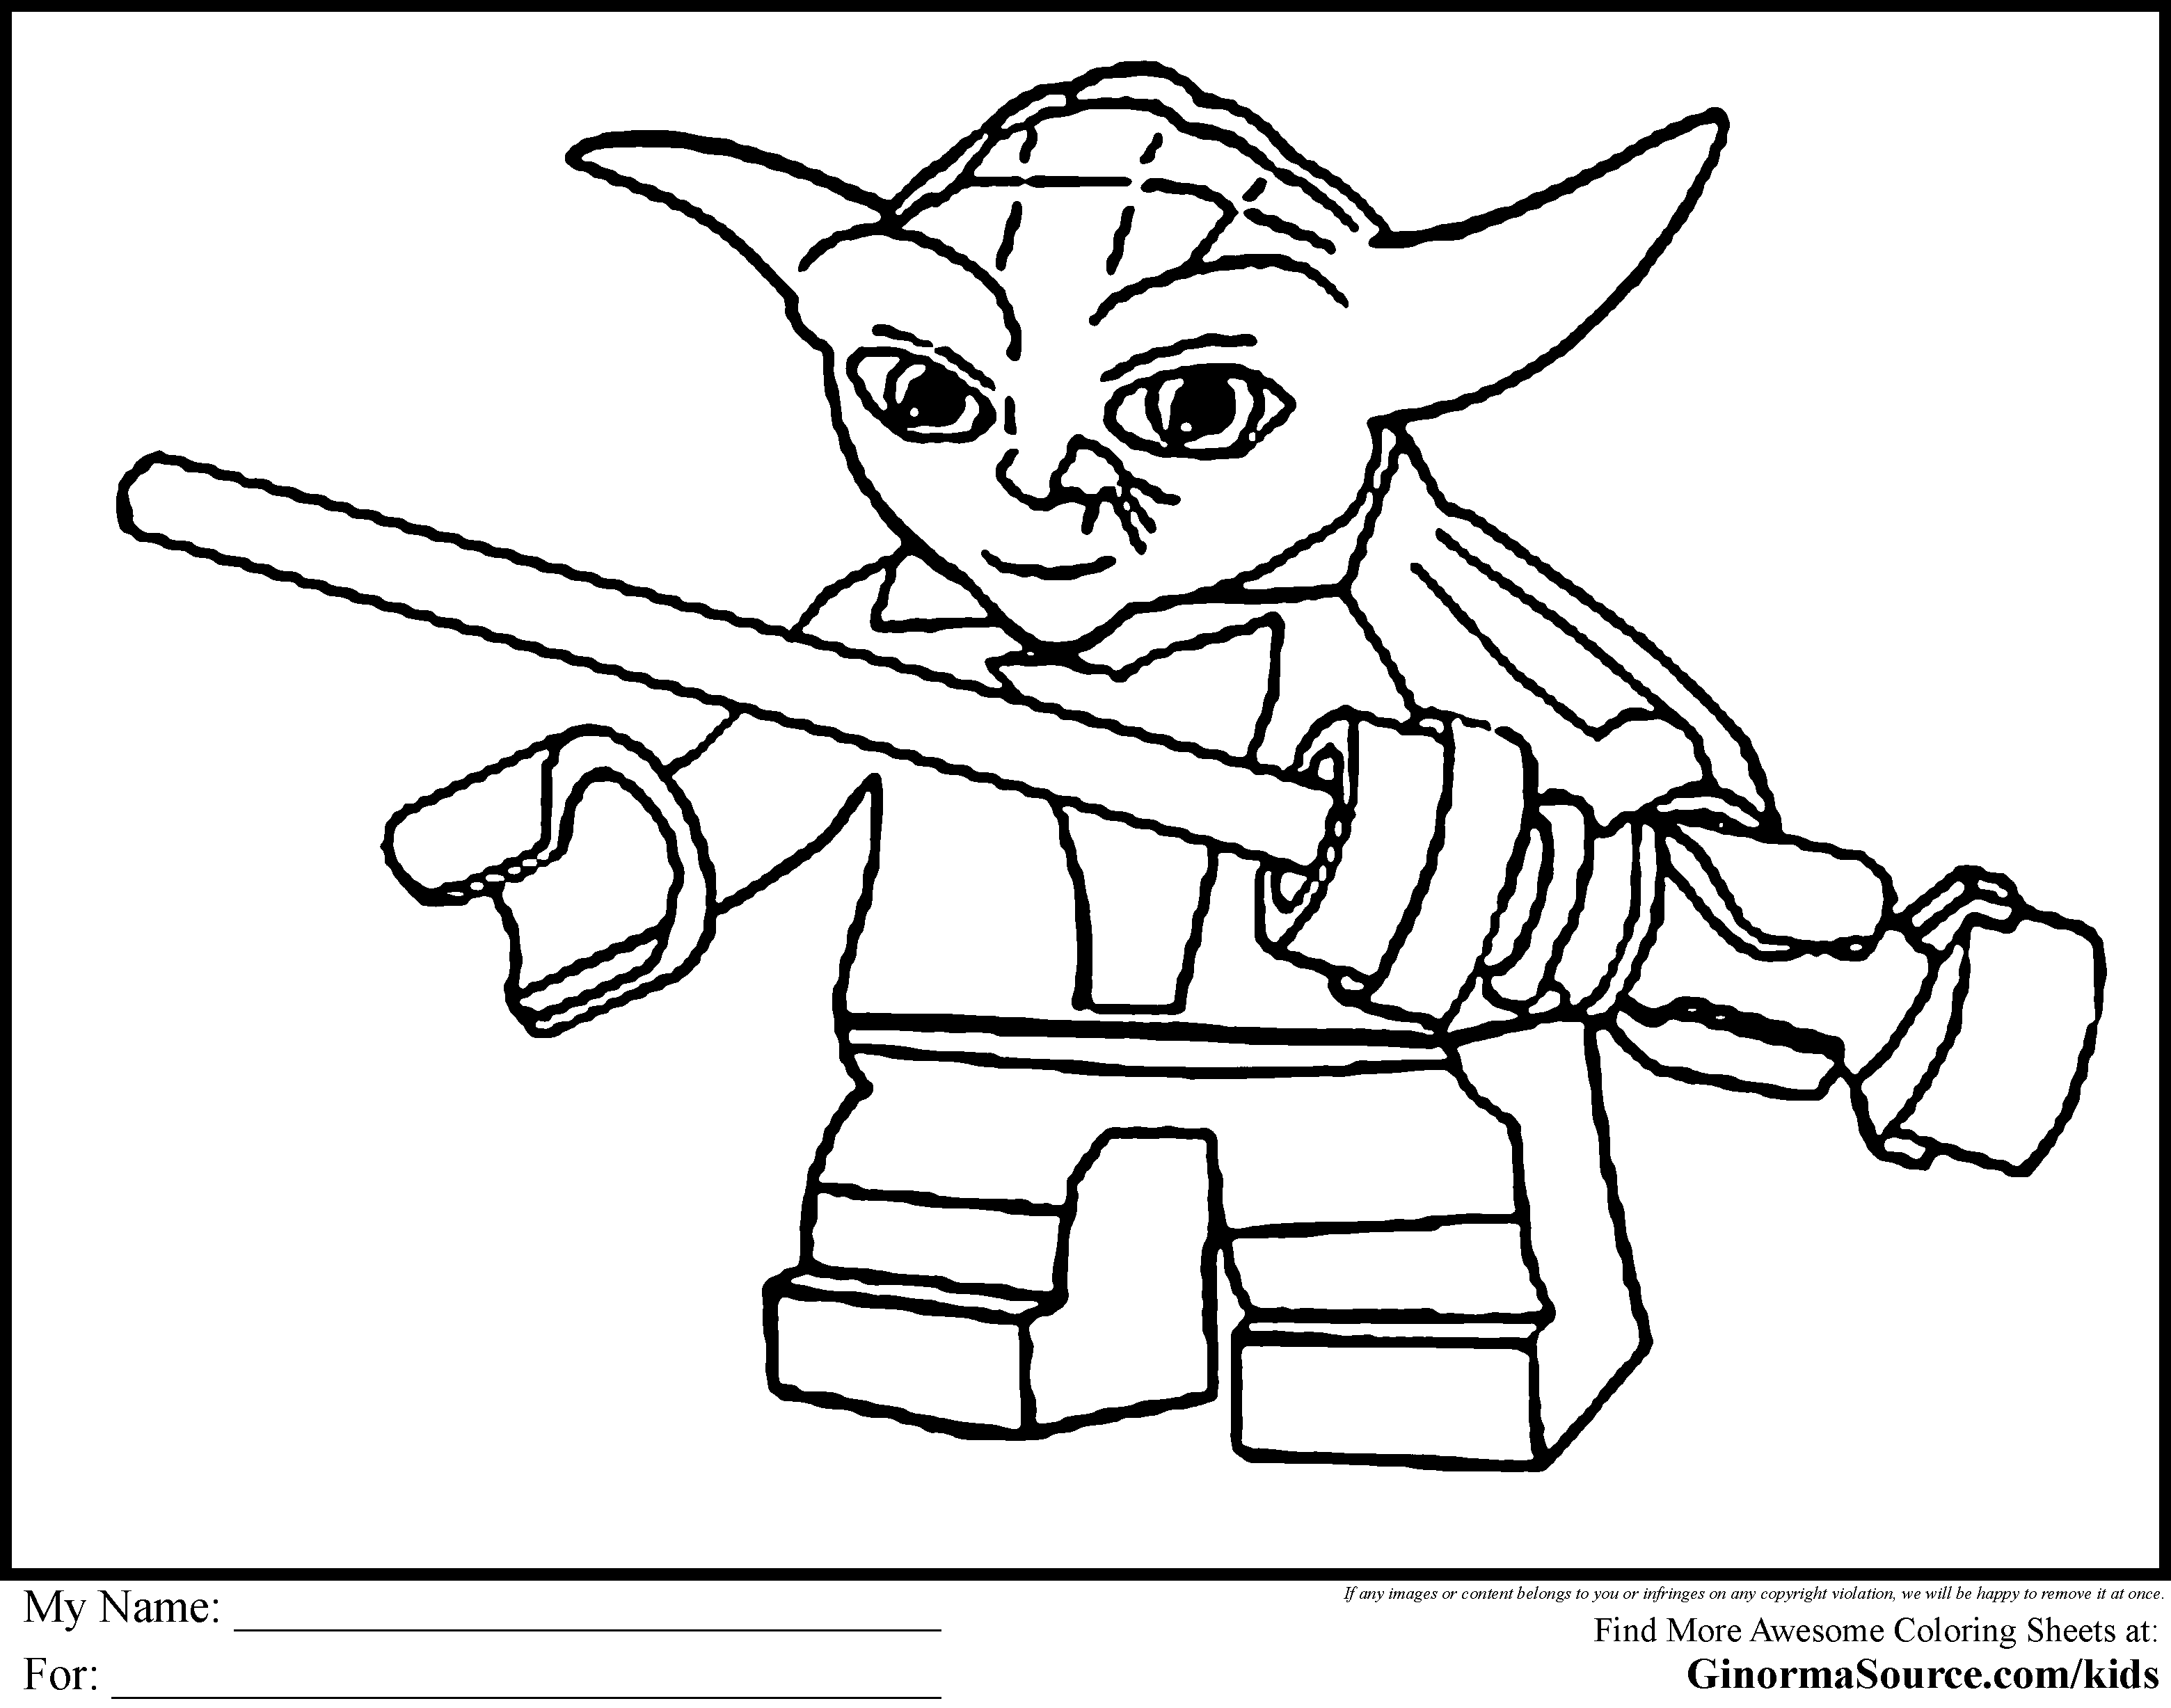 free printable lego star wars coloring pages for Sale,Up To OFF 21